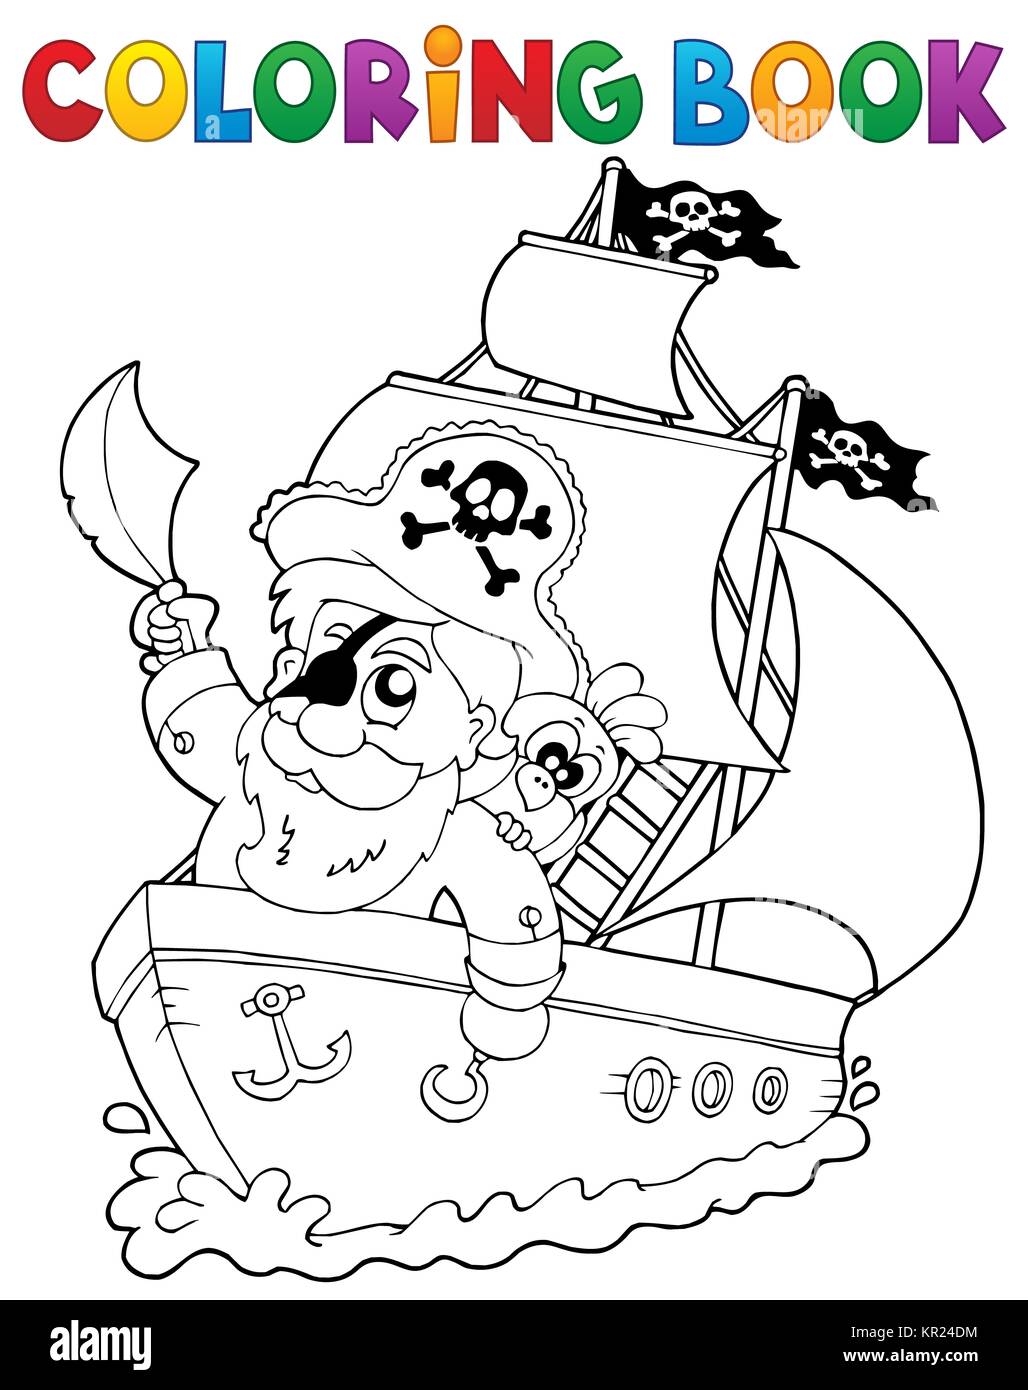 Coloring book ship with pirate 2 Stock Photo